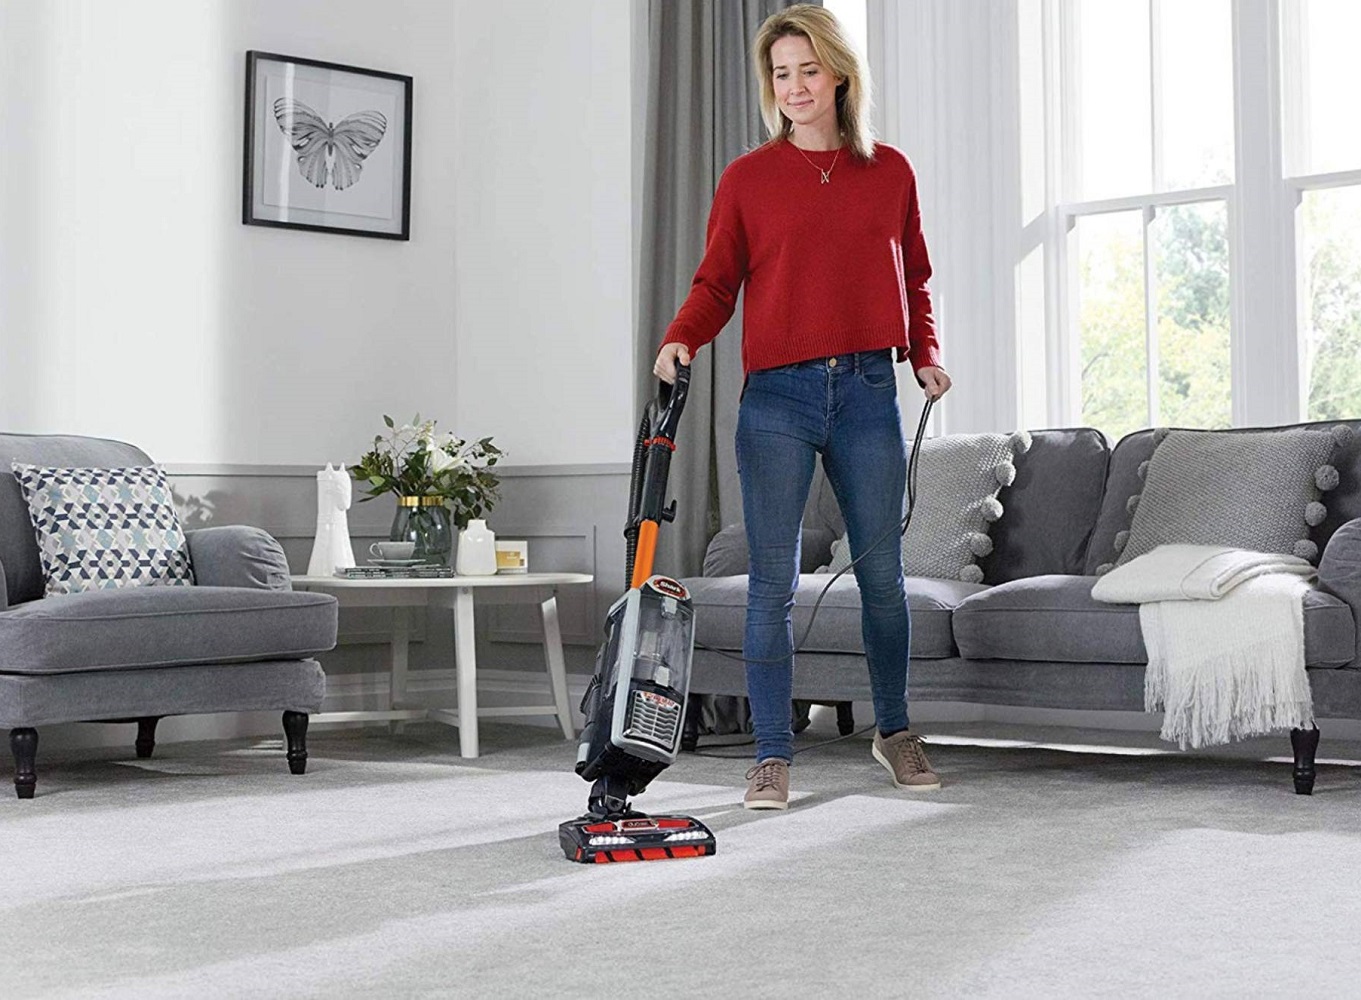 7 Best Upright Vacuum Cleaners for January 2022